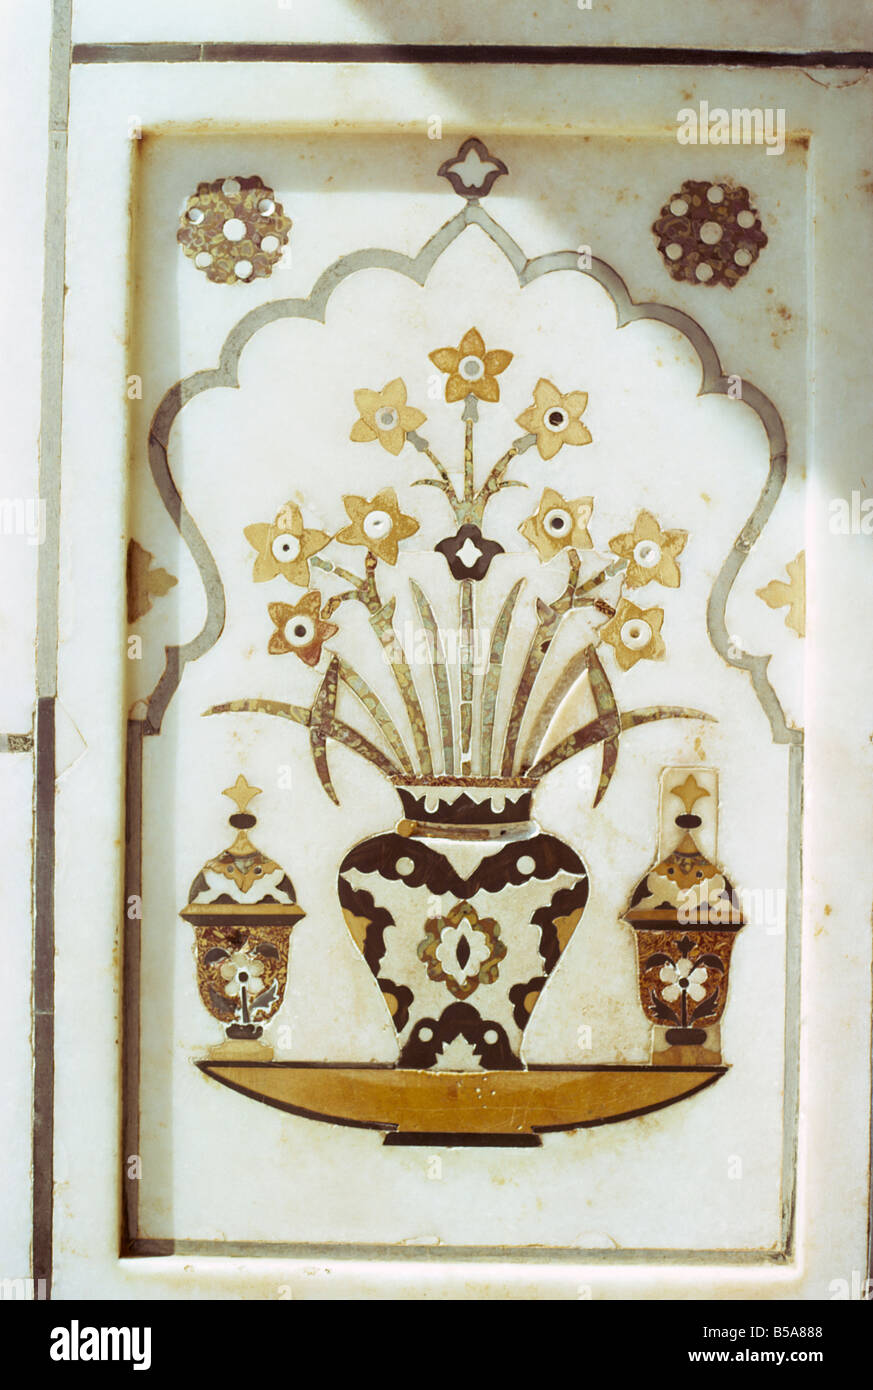 Detail of inlay work, Itimad-ud-Daulah's tomb, built by Nur Jehan, wife of Jehangir in 1622 AD, Agra, Uttar Pradesh state, India Stock Photo